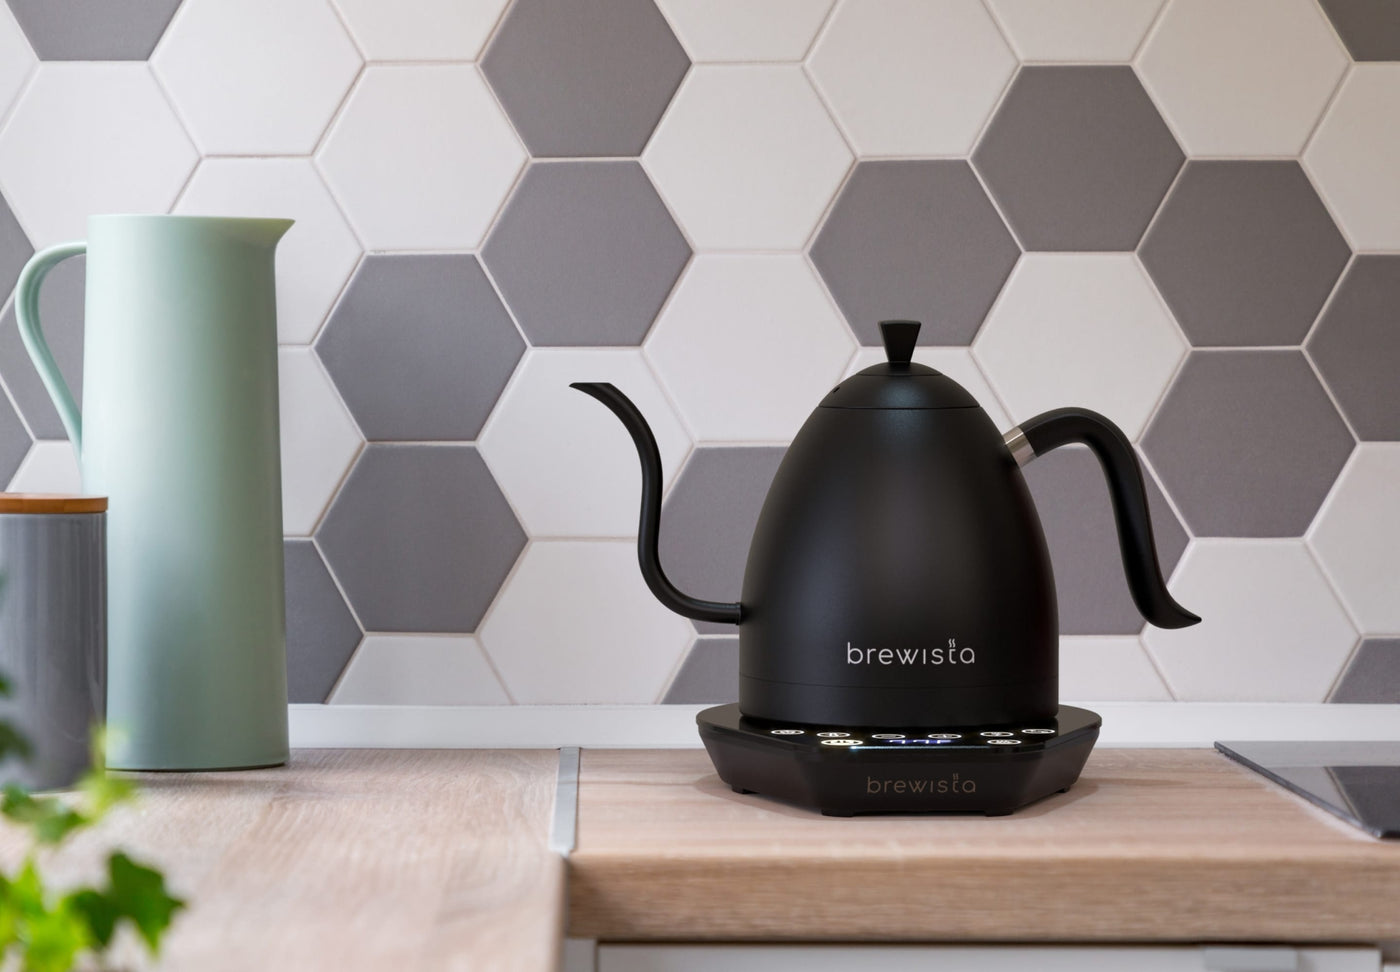 Brewista Artisan kettle sitting on a kitchen counter. Image created using 3D and AR (augmented reality)